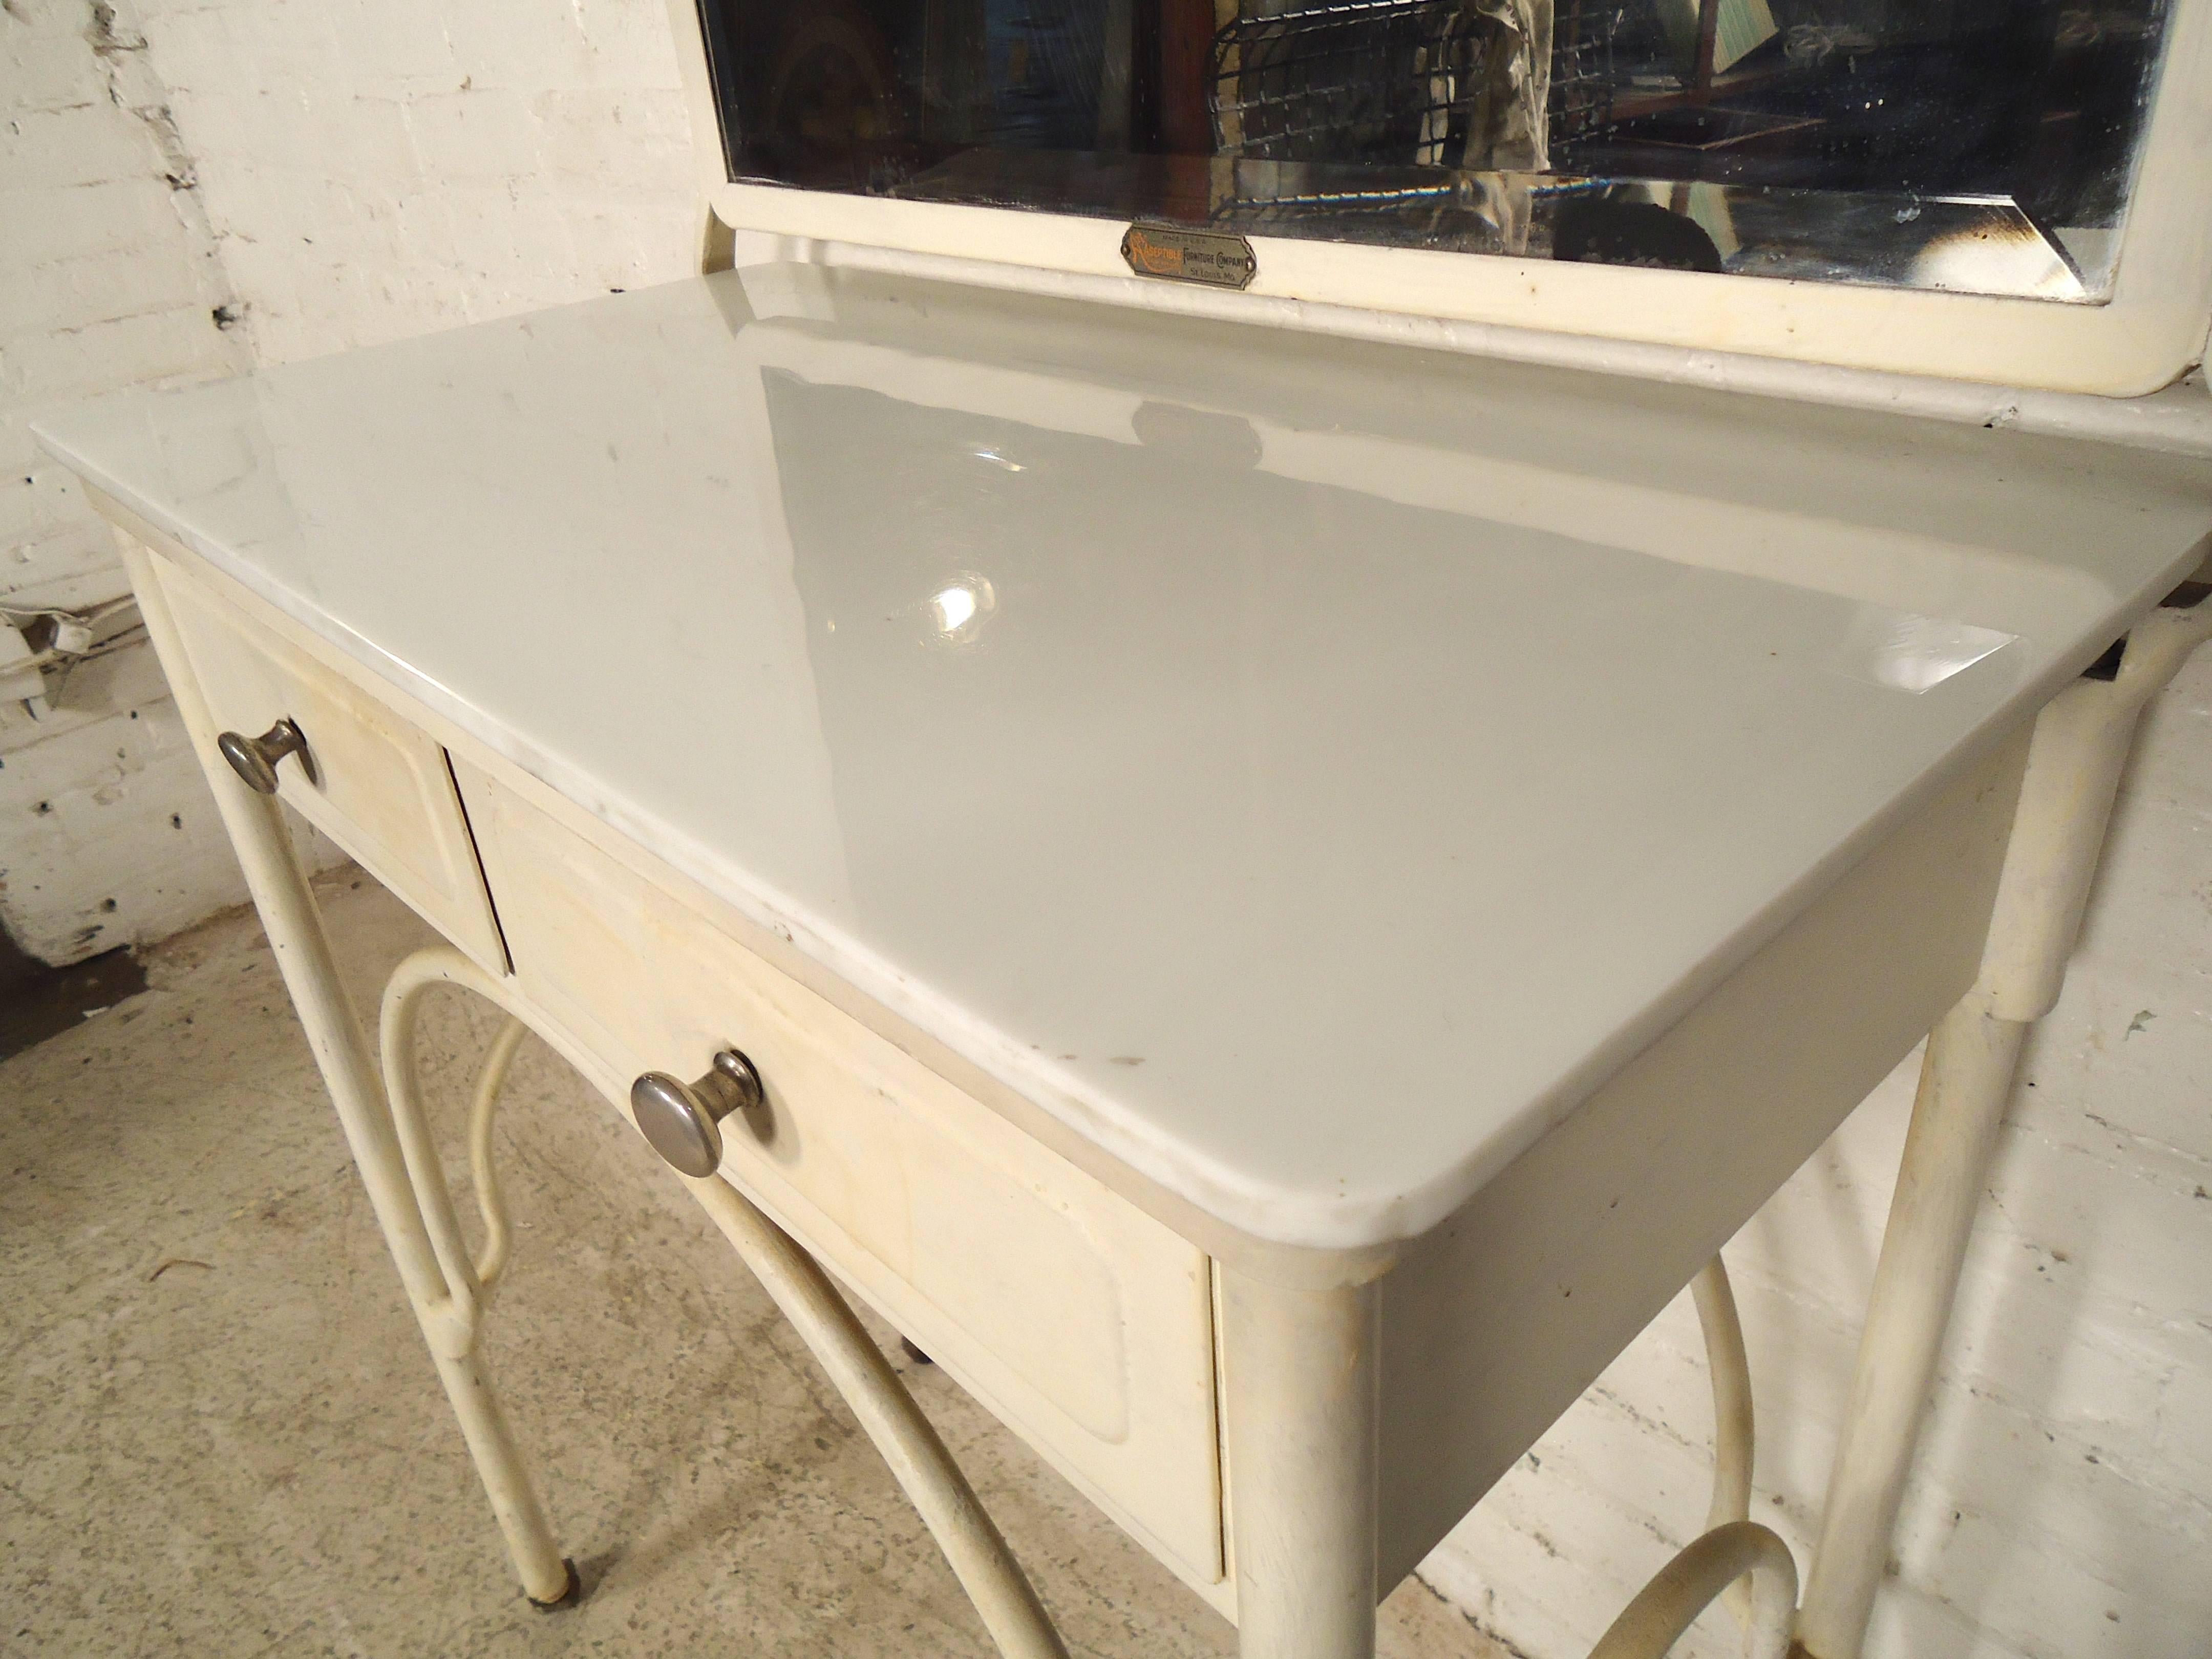 This unique vanity features white painted metal frame, large vintage mirror and a milk glass desk top. Rolling casters give easy mobility, and painted back allows for placement anywhere in the room.
This piece can also be stripped and given an